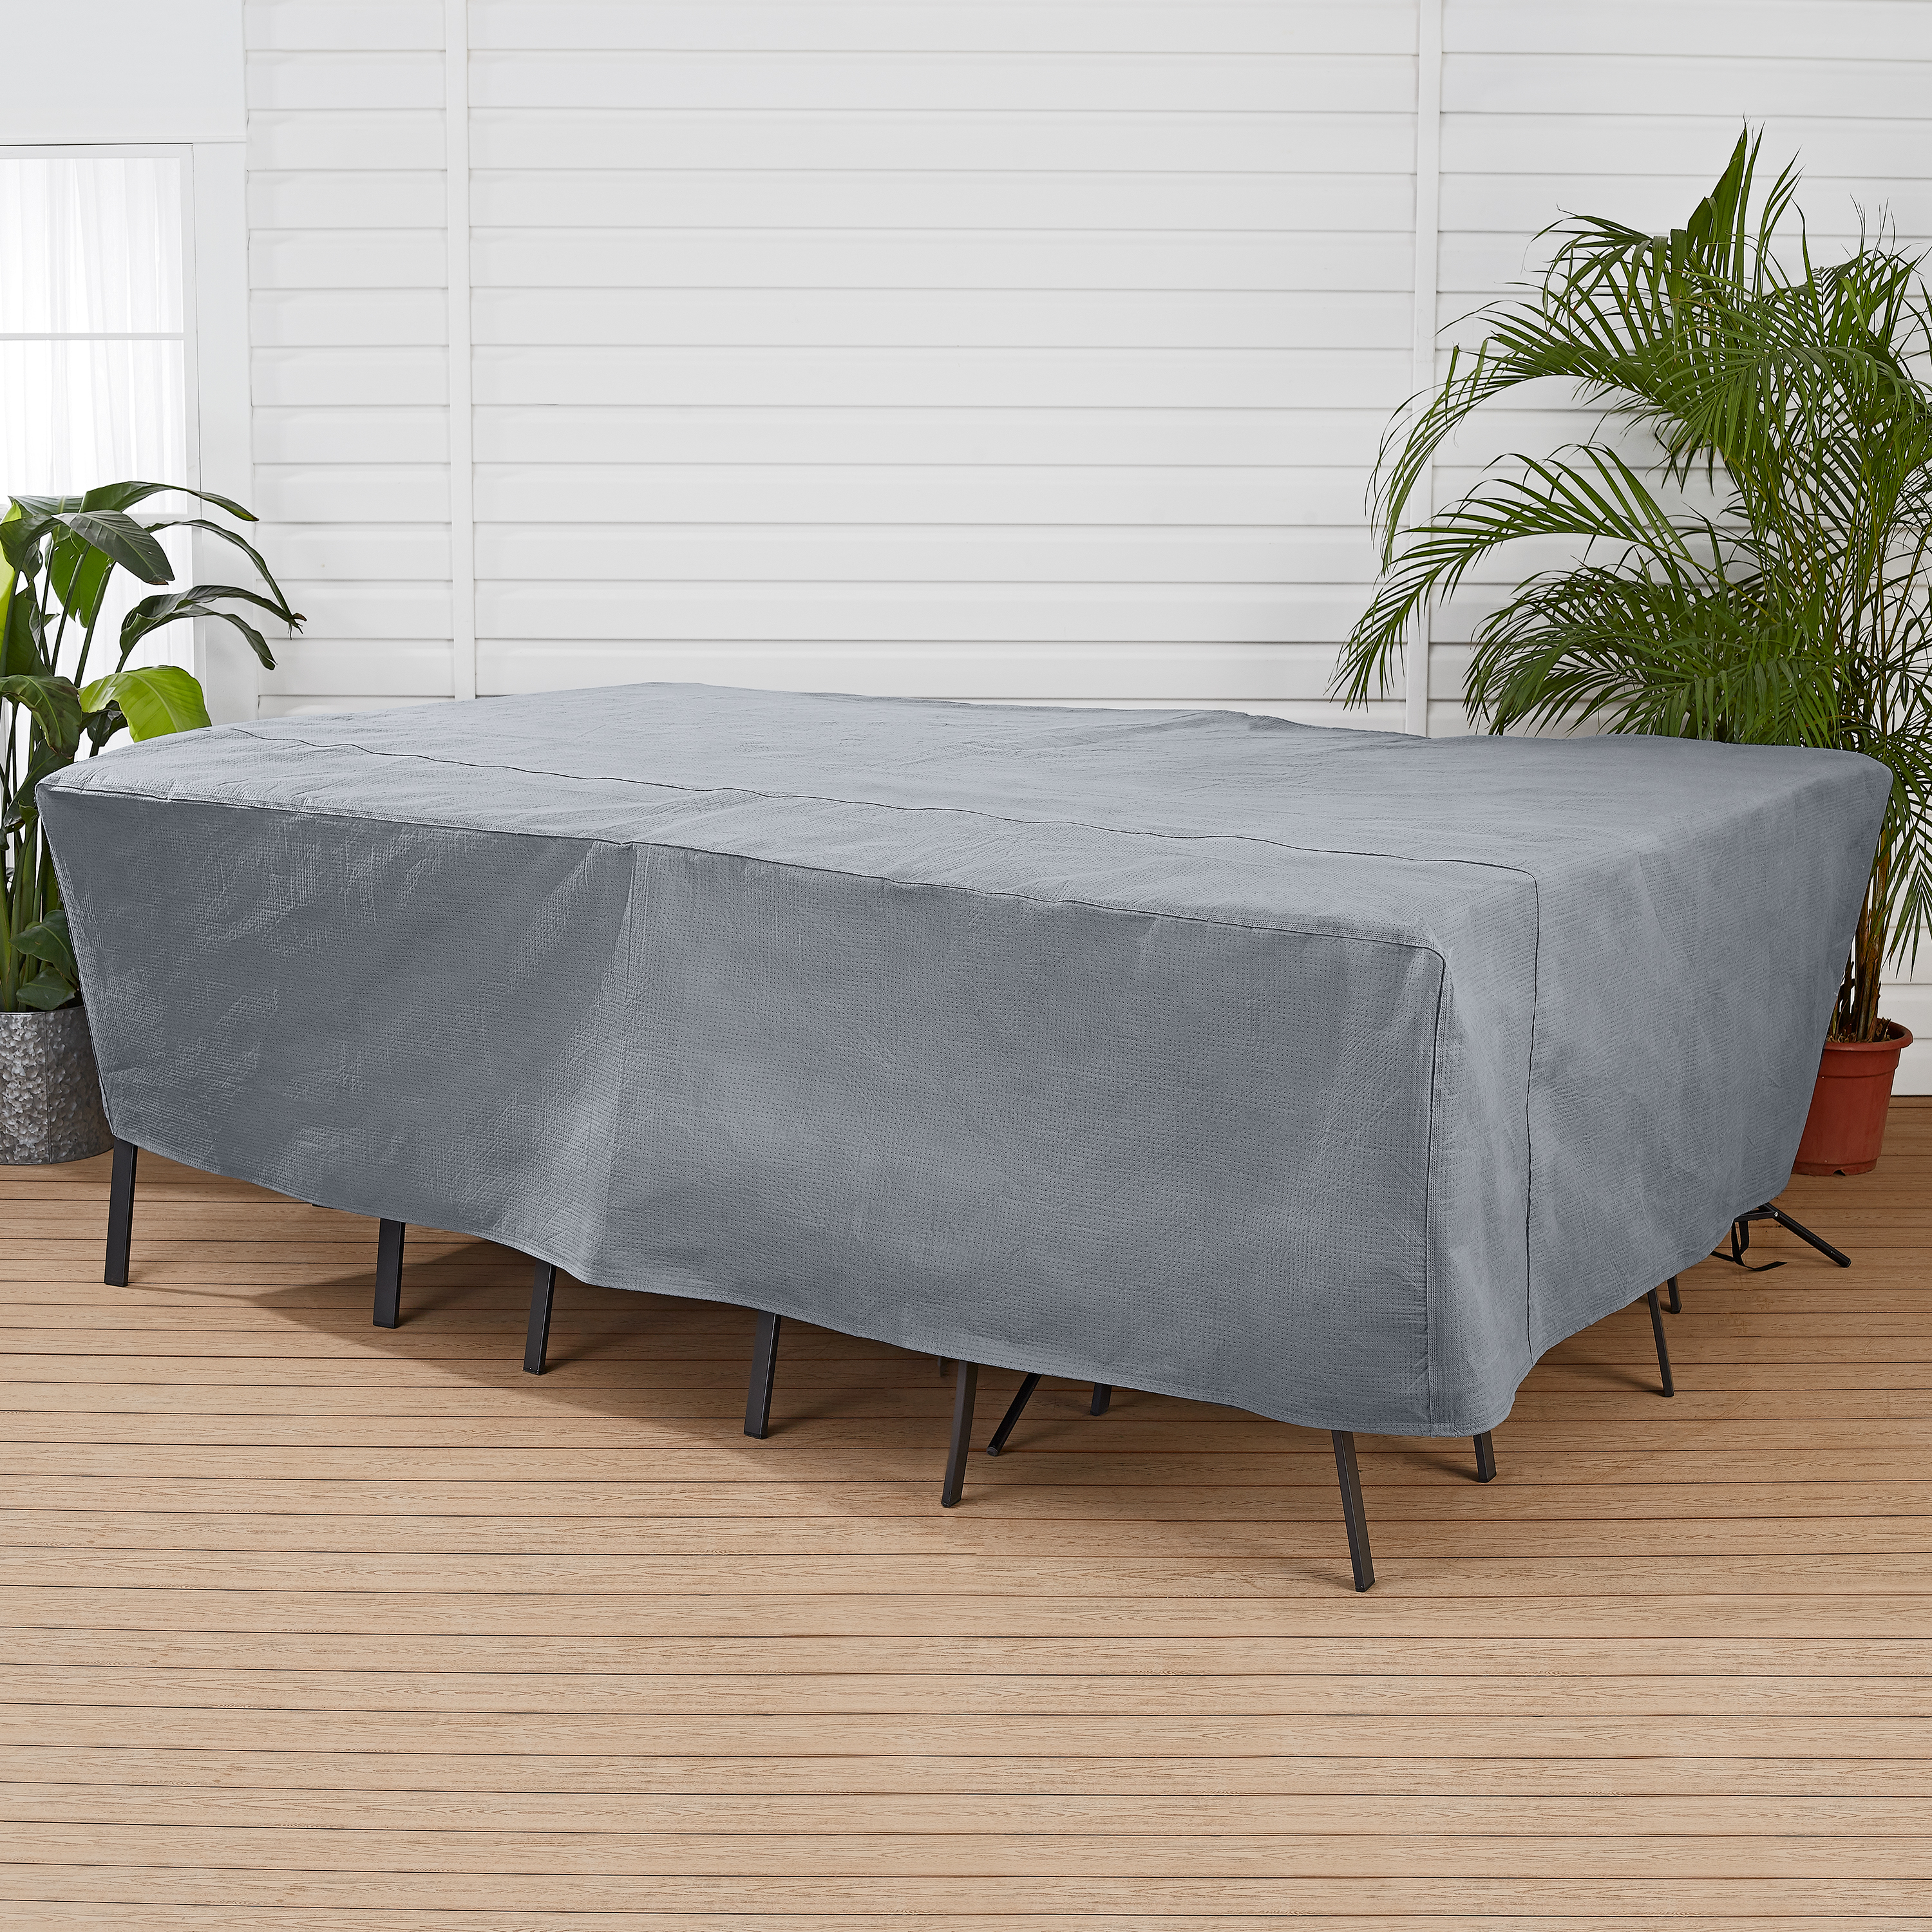 Mainstays Sandell 100 Patio Chat Set Cover In Gray Large within sizing 3000 X 3000